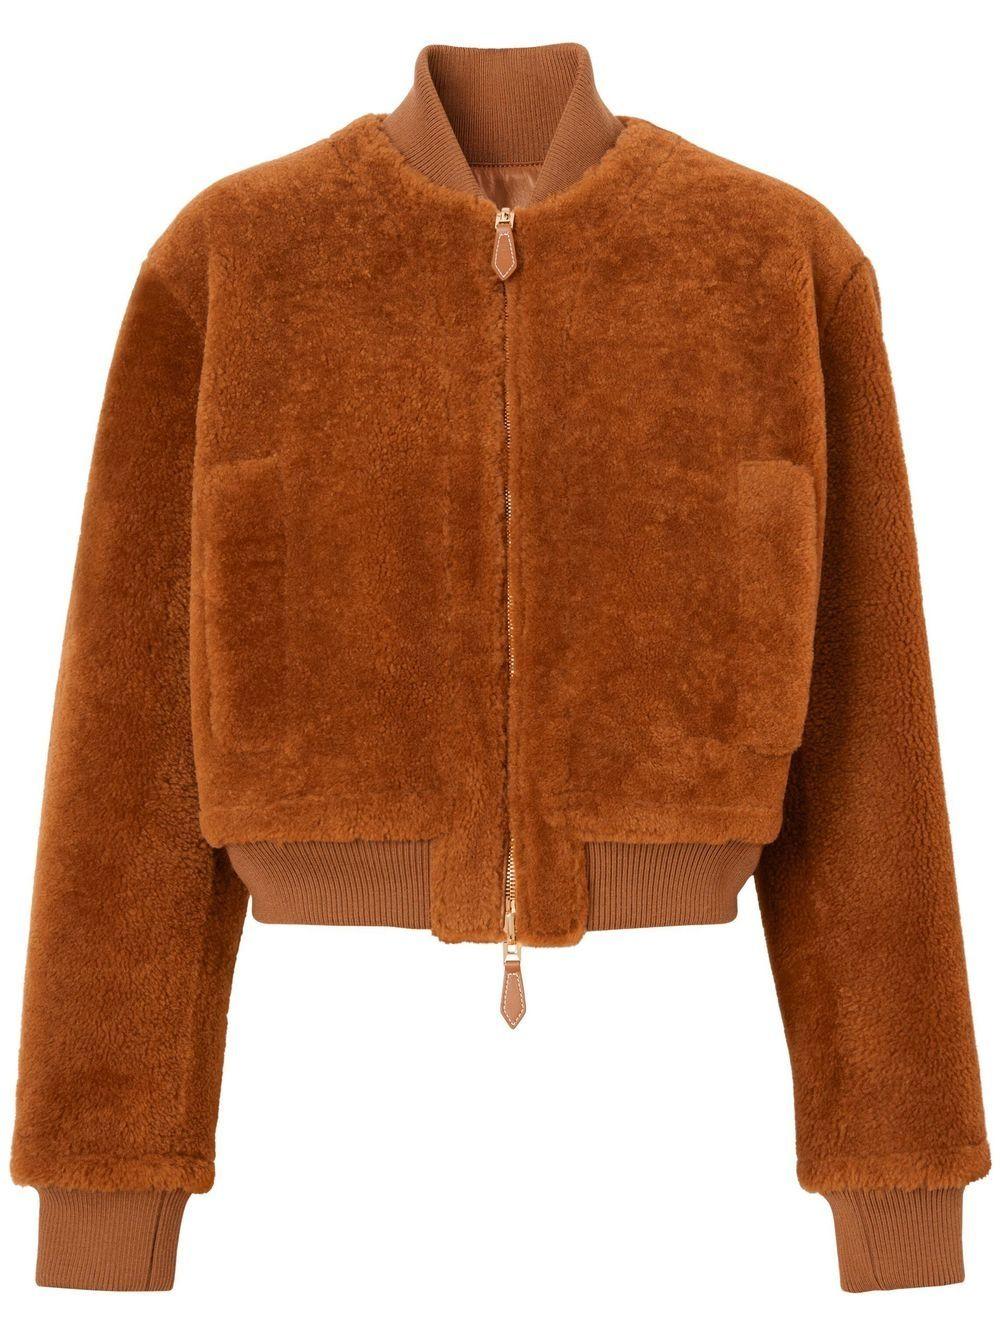 Burberry Shearling Bomber Jacket in Brown | Lyst